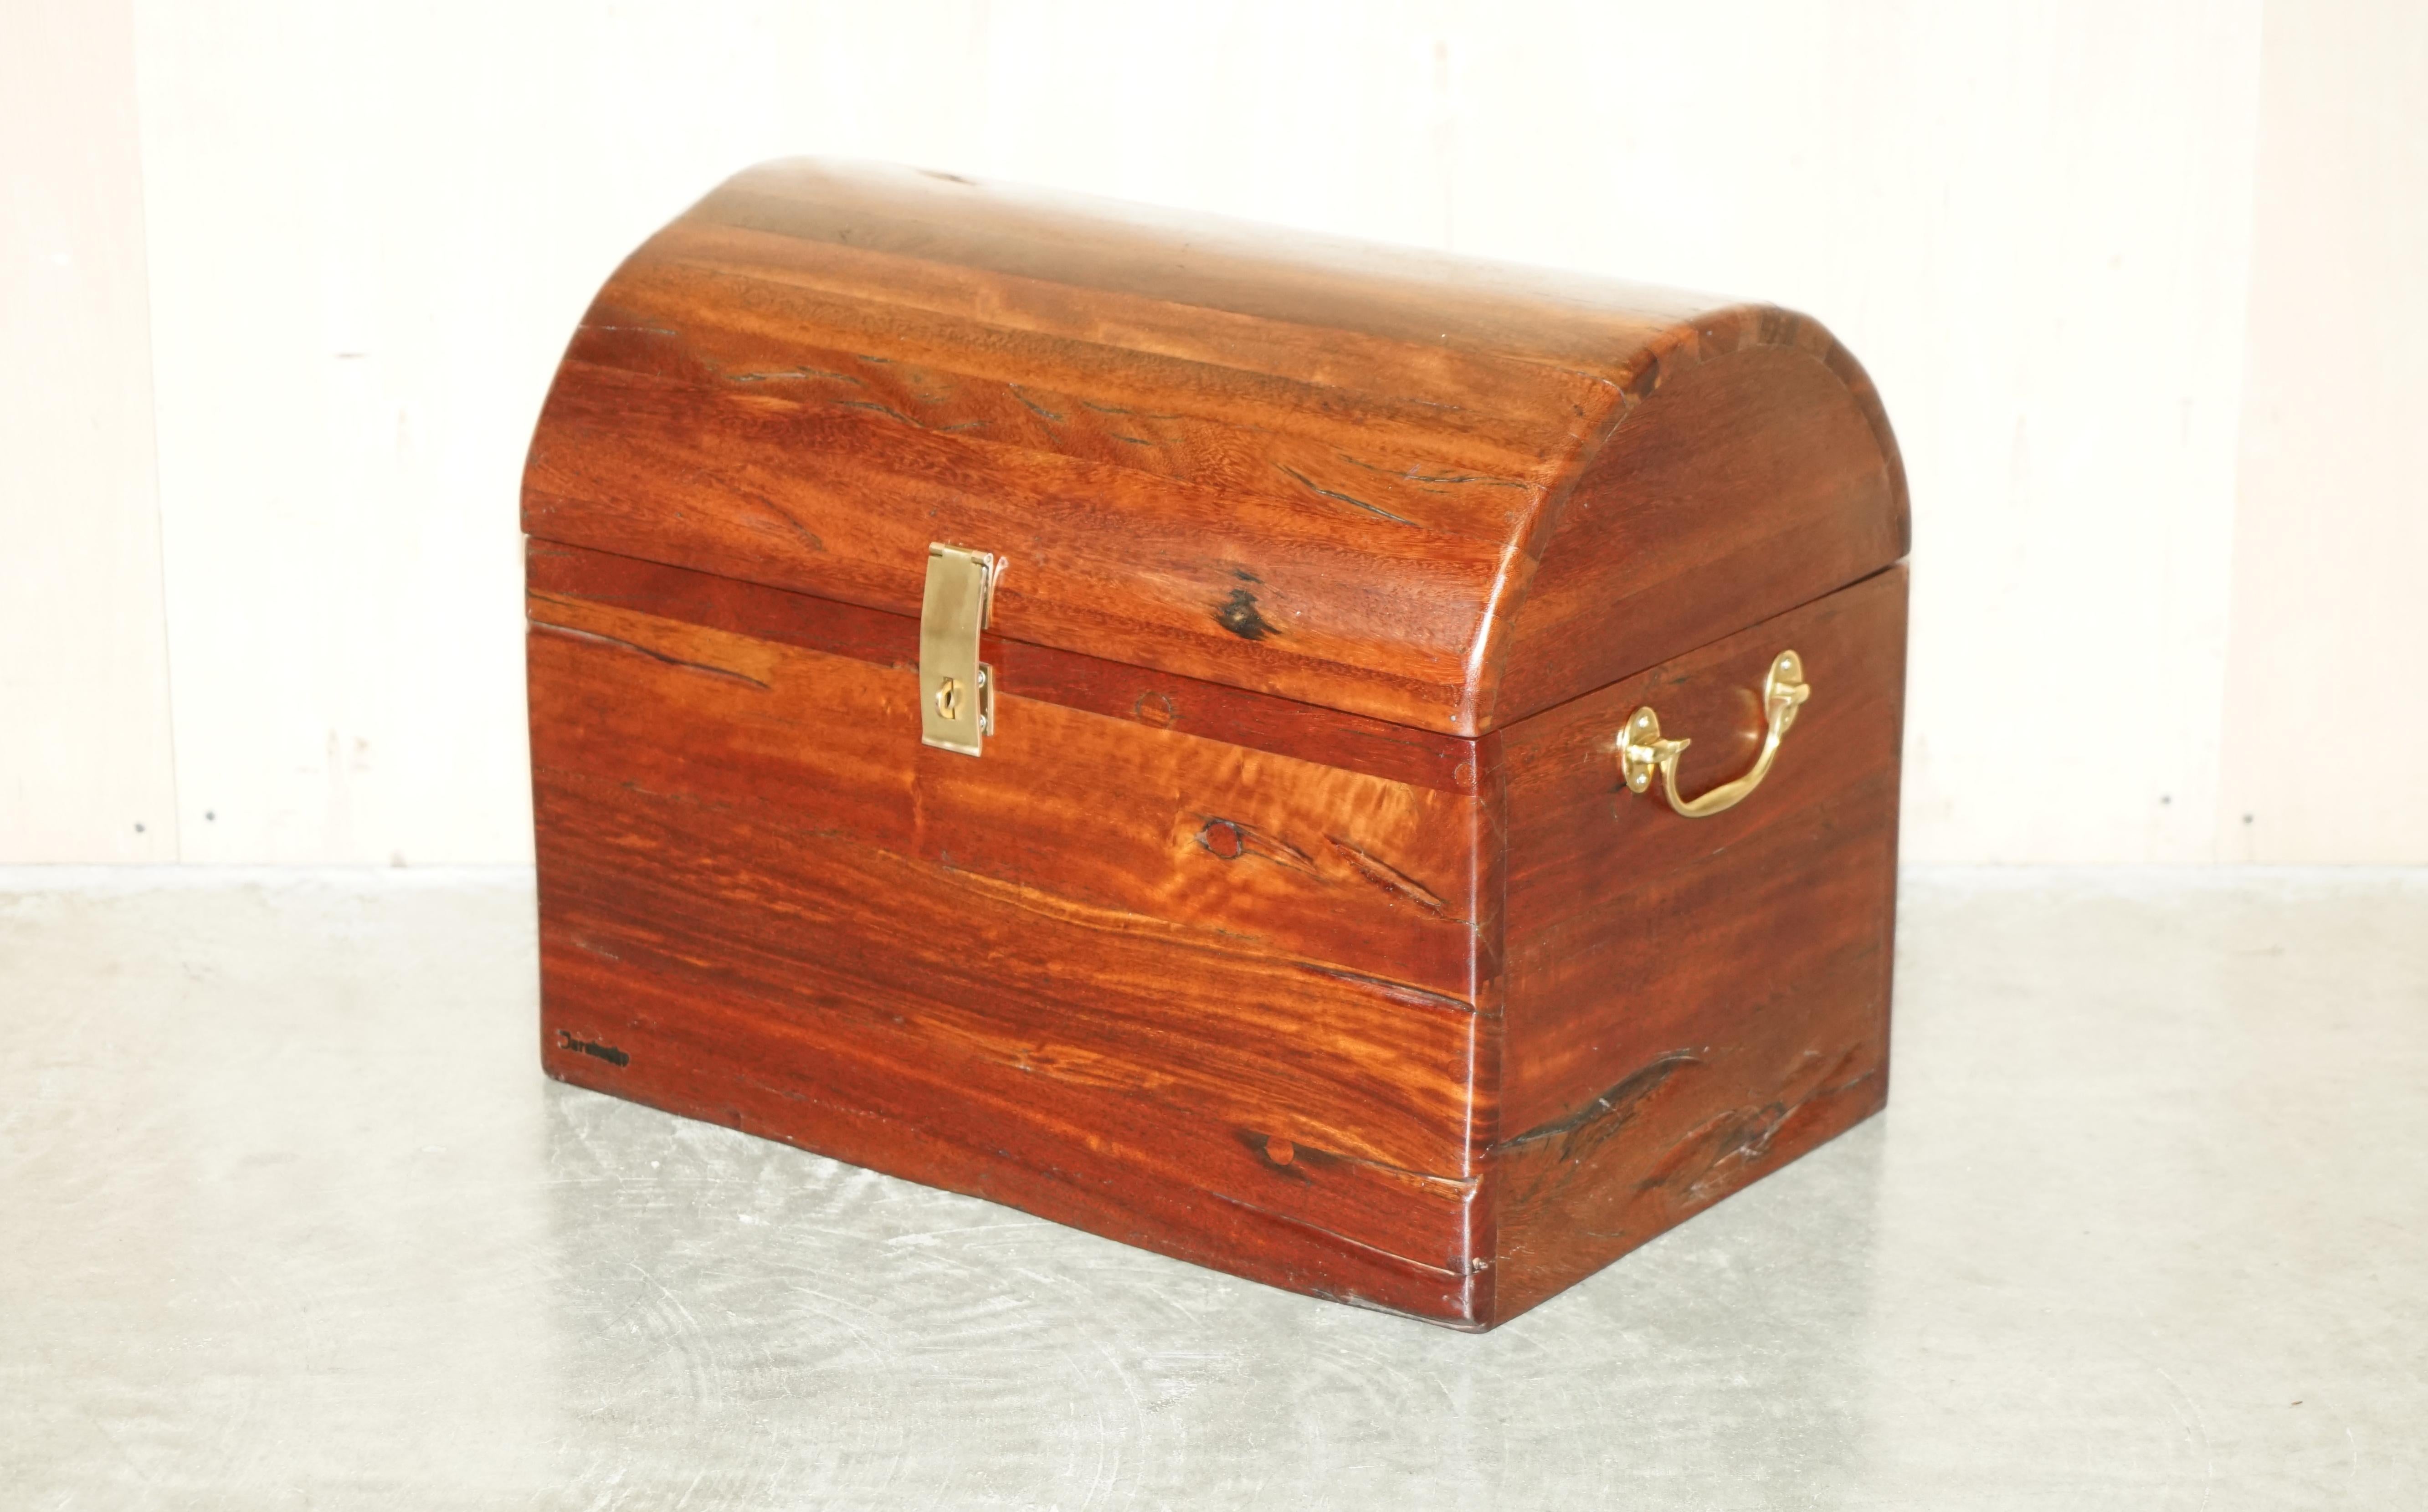 Royal House Antiques

Royal House Antiques is delighted to offer for sale this very good looking and highly decorative Jarabosky teak dome topped steamer travel trunk 

Please note the delivery fee listed is just a guide, it covers within the M25